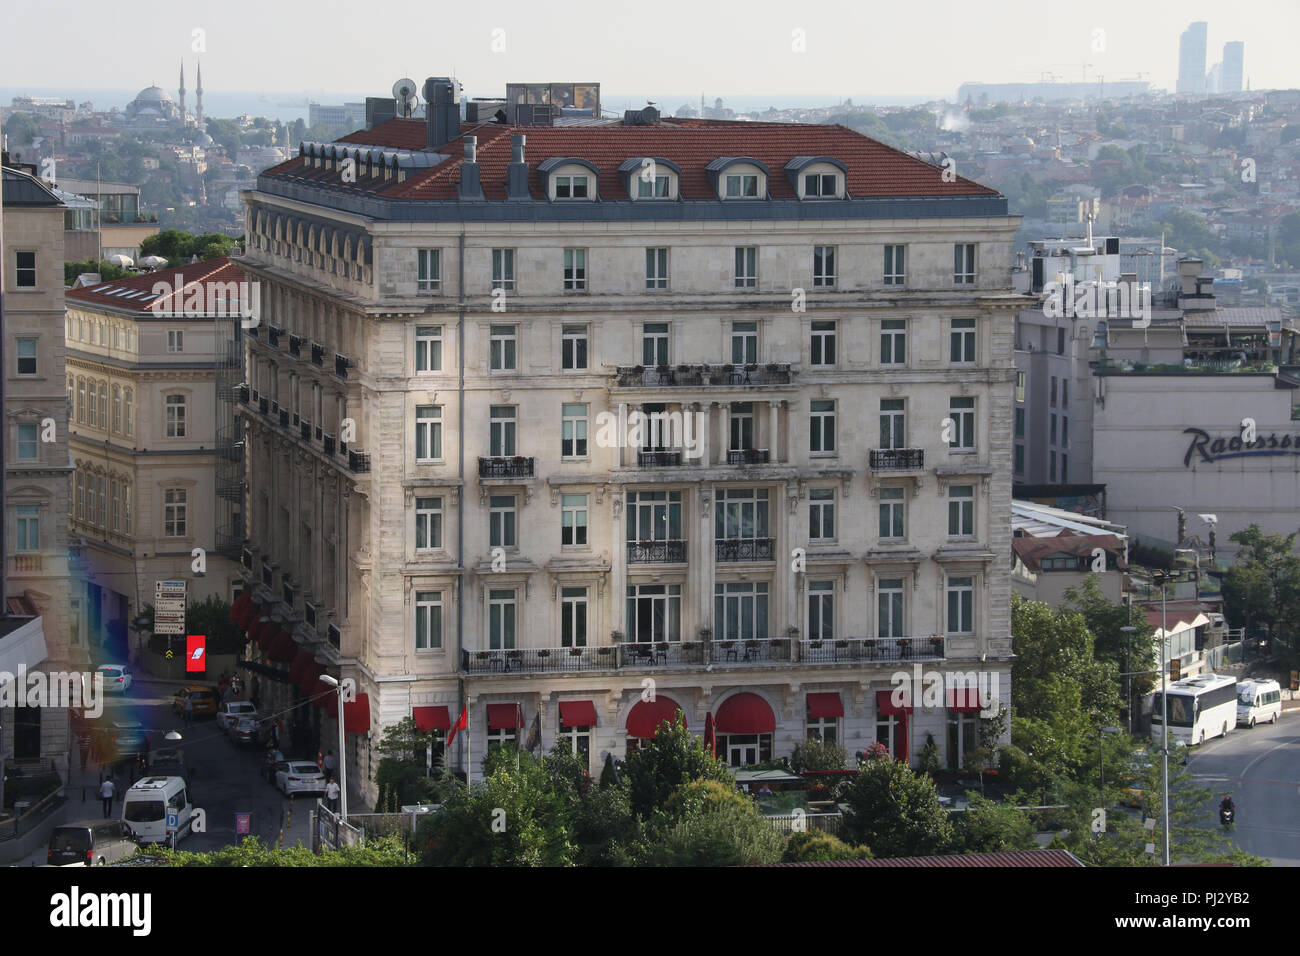 The Pera Palace Hotel, Beyoğlu, Istanbul, Turkey, viewed from the roof terrace of the Grand Hotel De Londres. Stock Photo